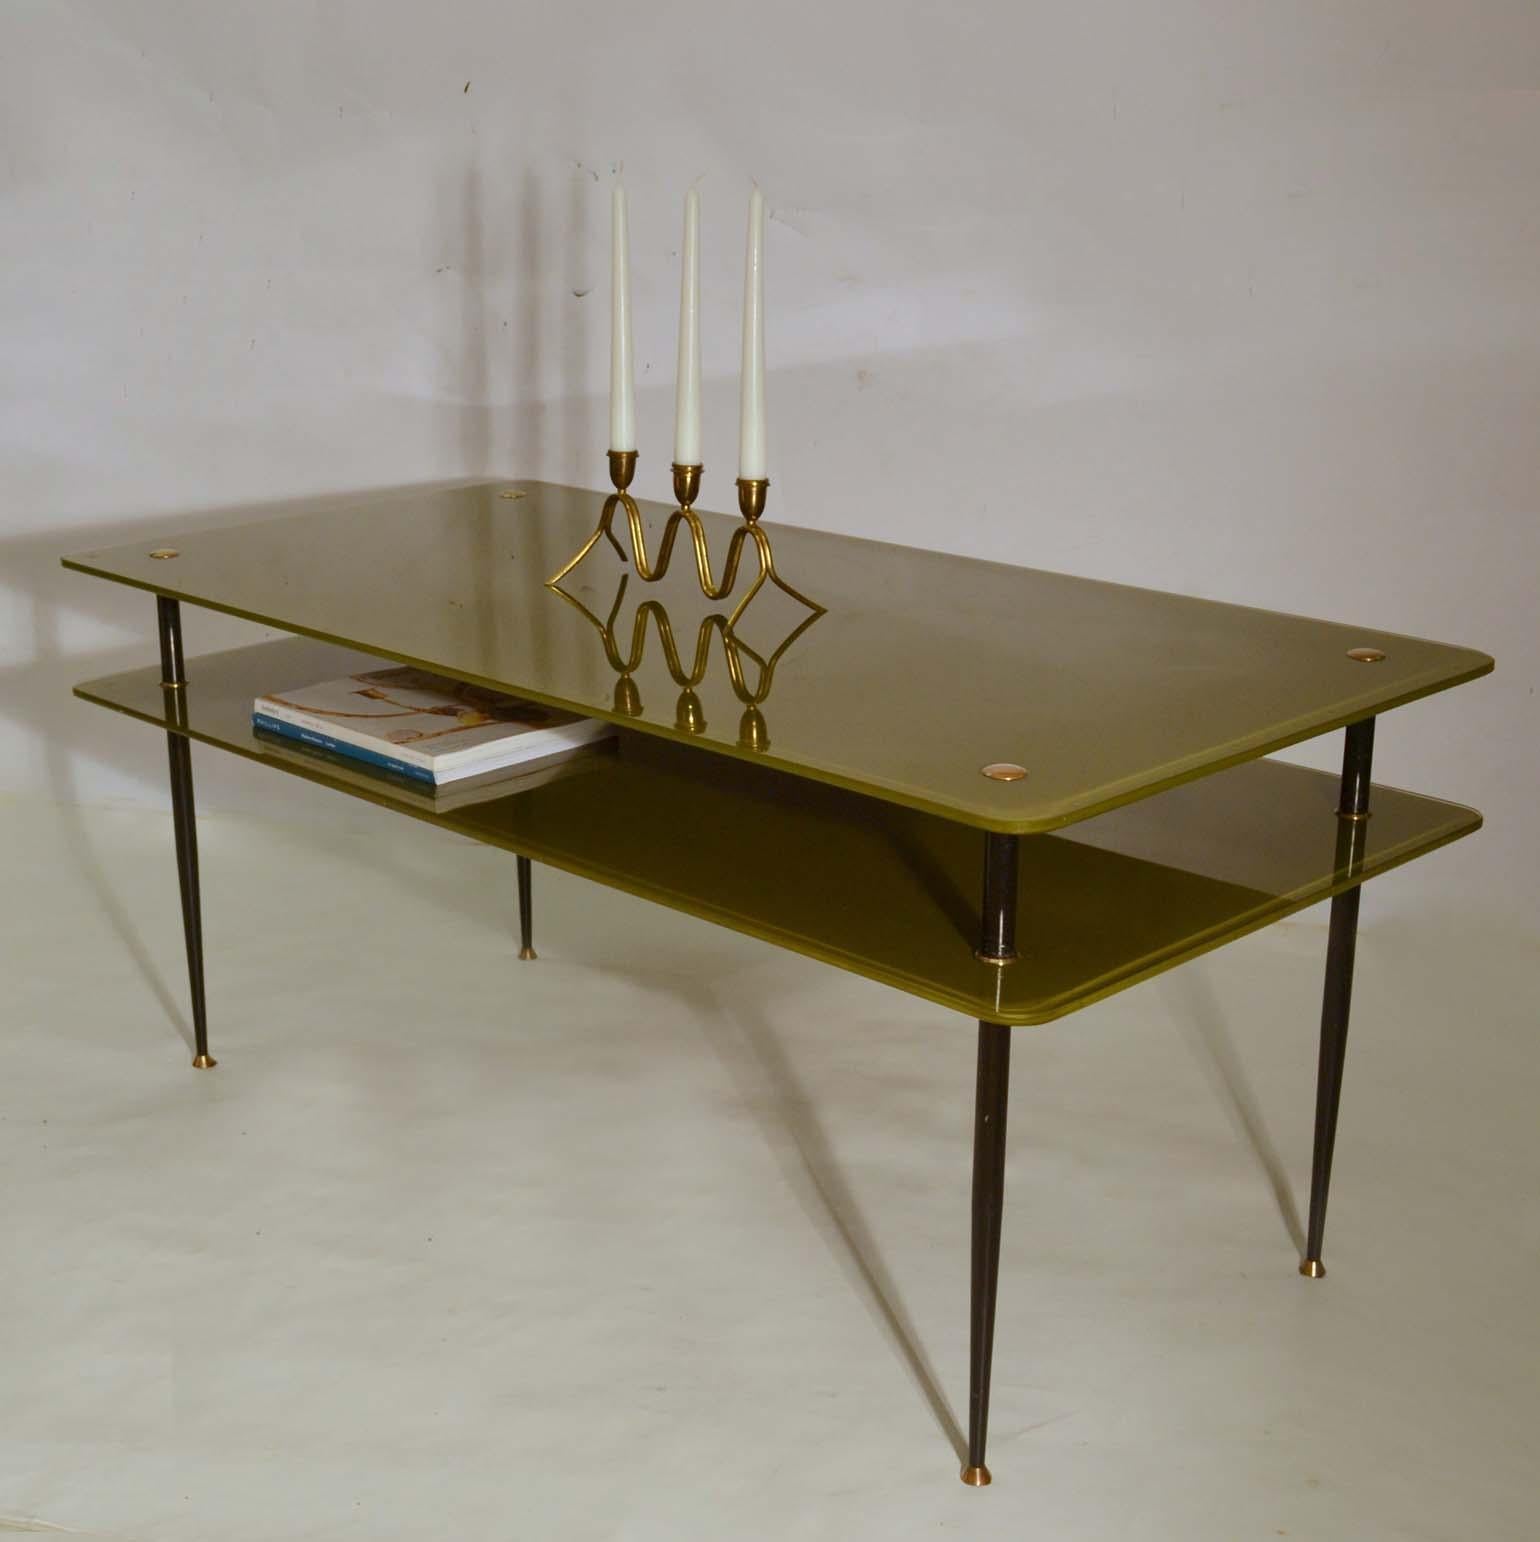 Mid-20th Century Olive Green Glass Coffee Table by Eduardo Paoli for Vitrex, Italy 1950s For Sale